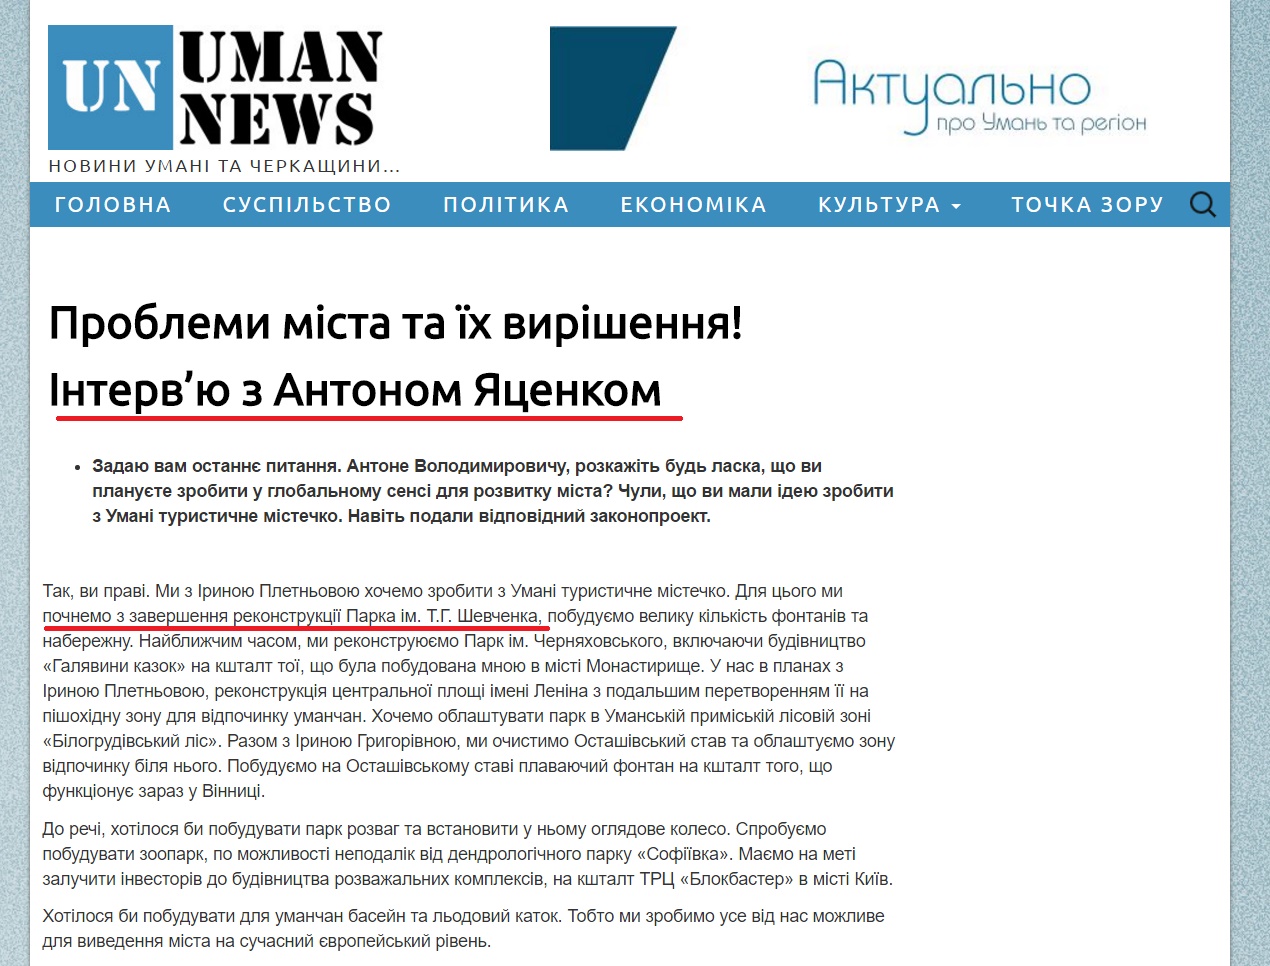 http://umannews.in.ua/?p=605